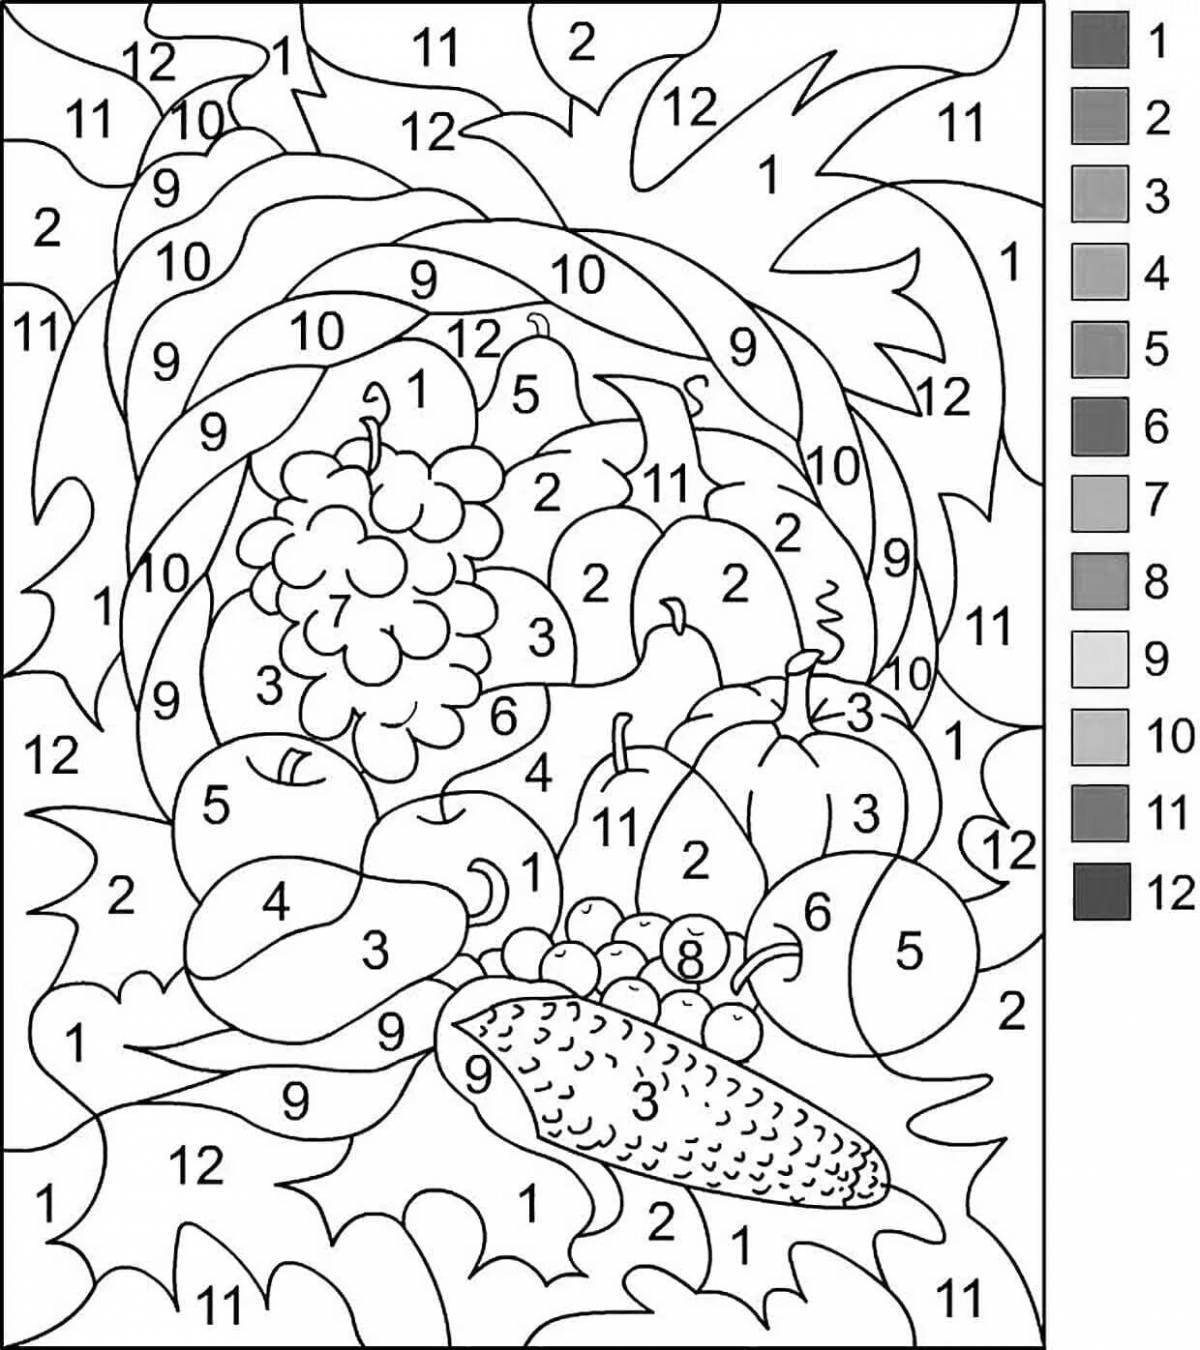 Innovative coloring book for kids with colored numbers